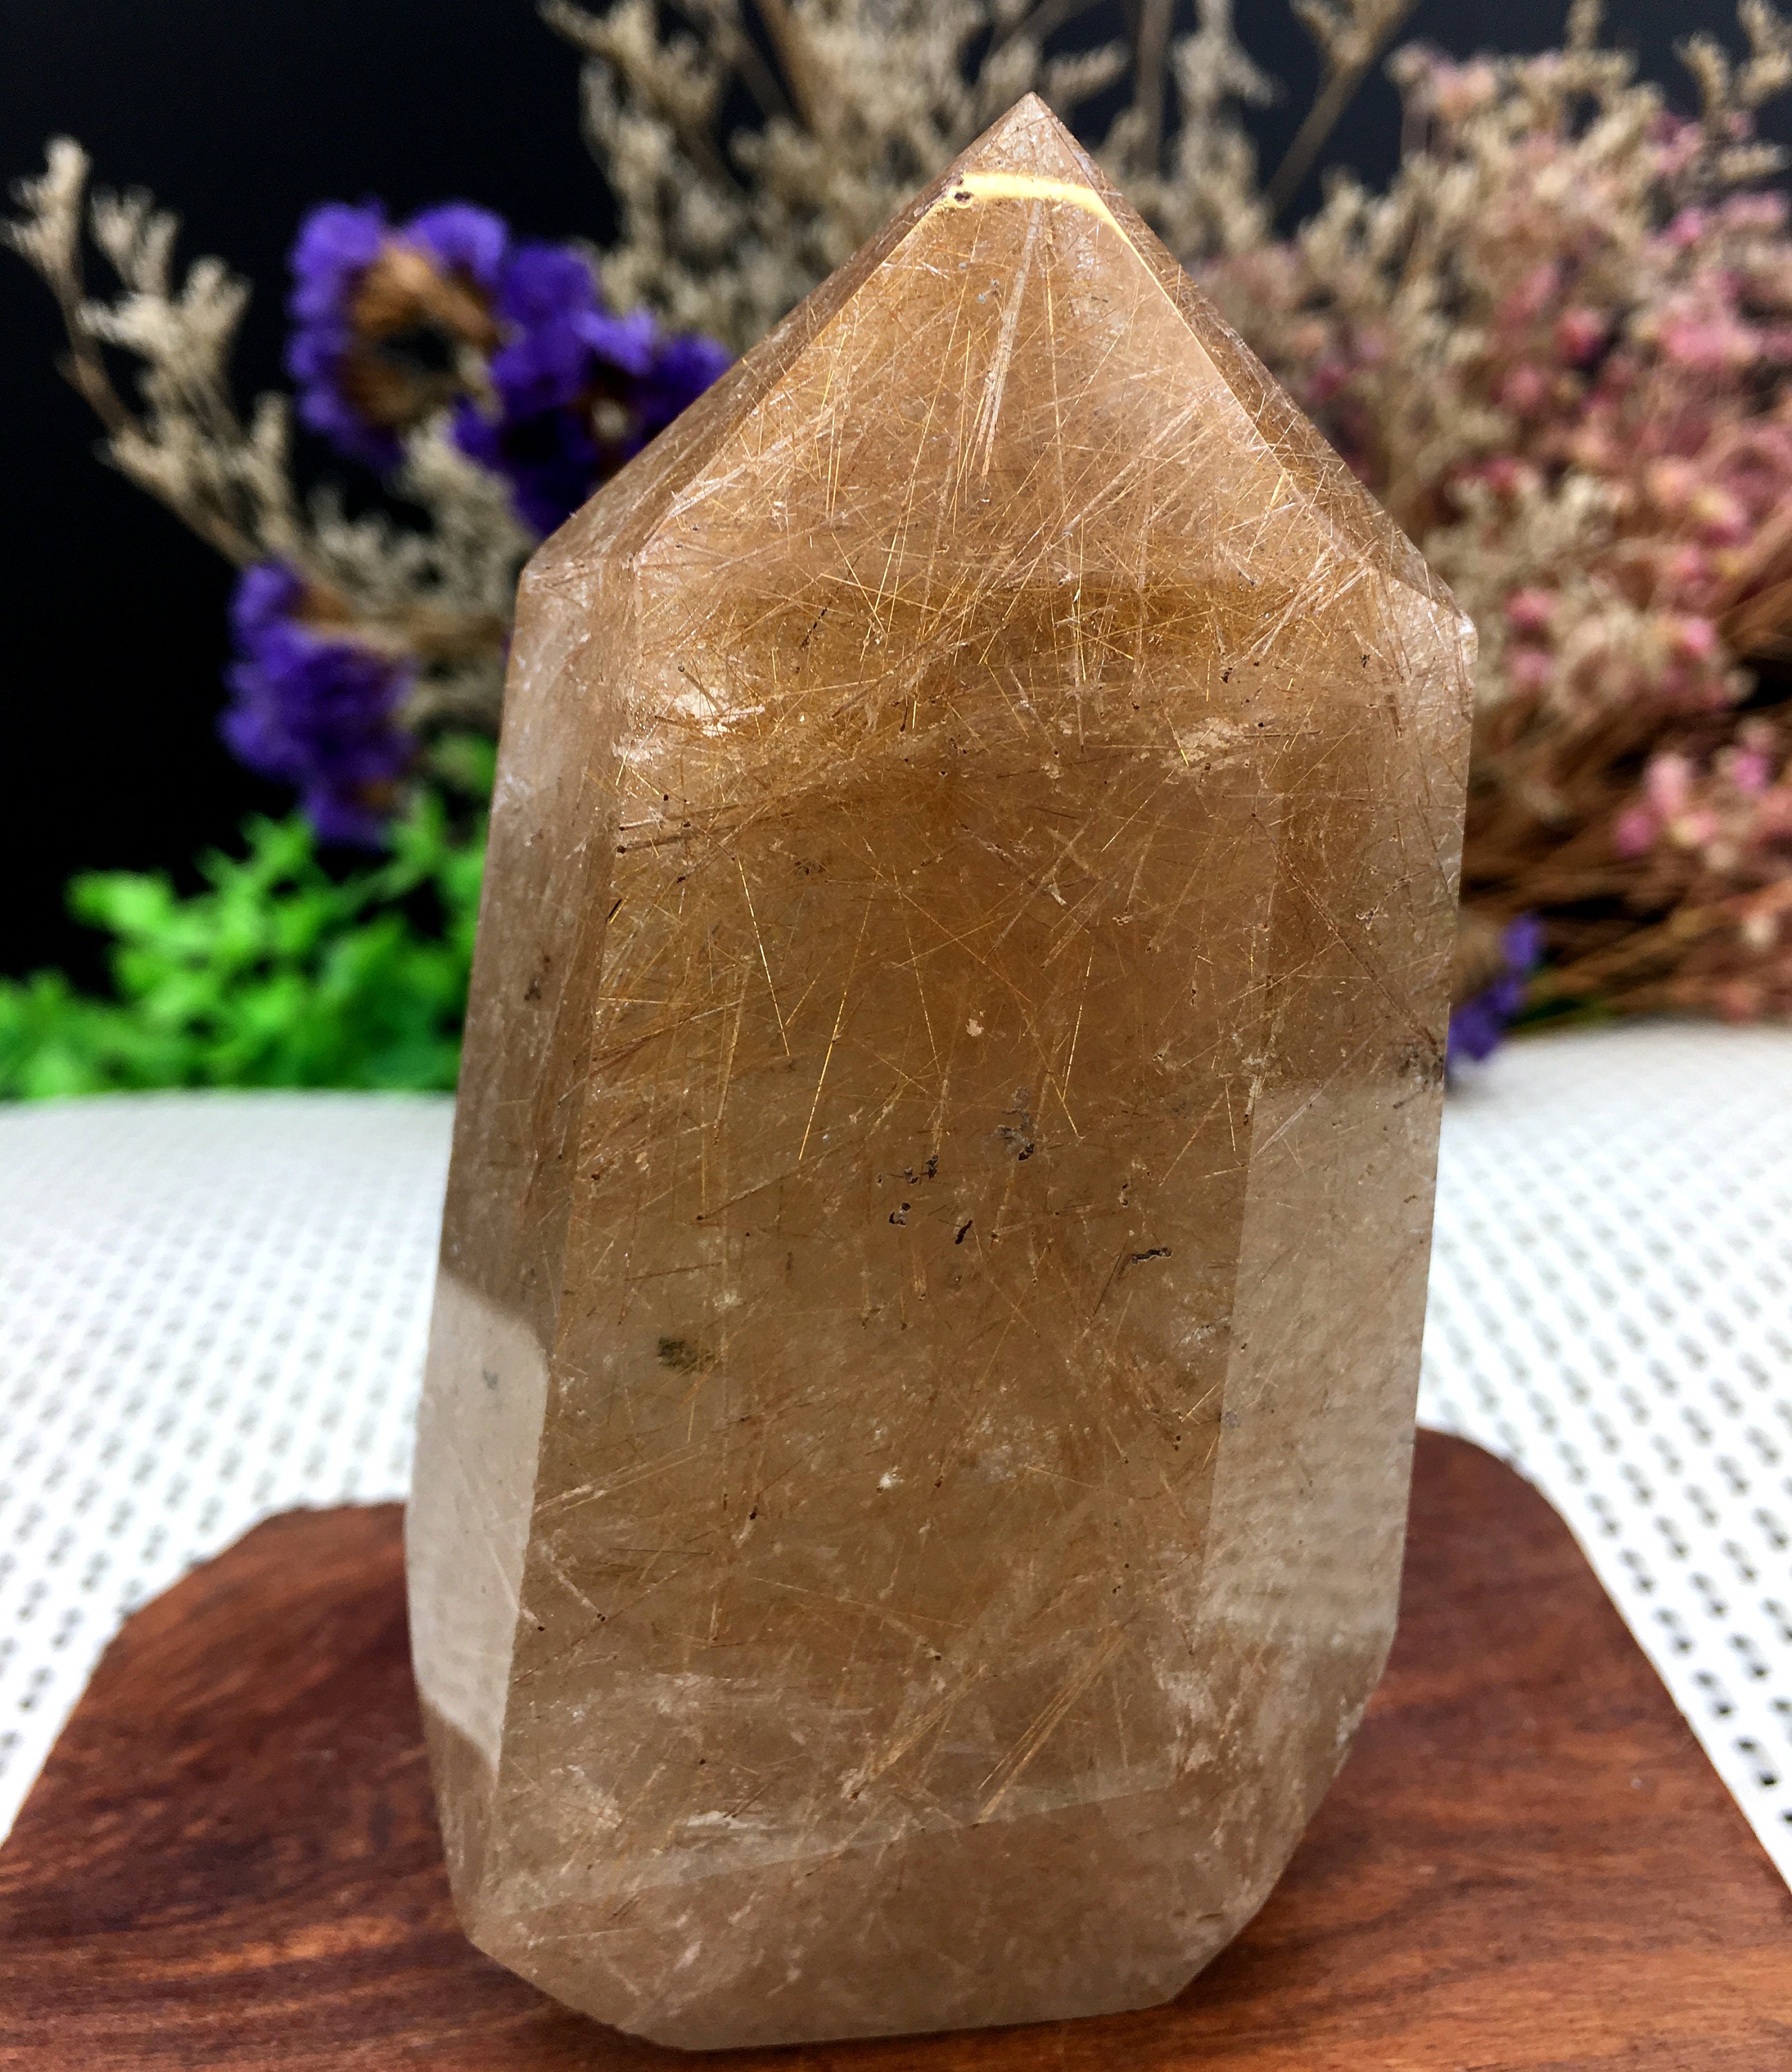 Rare Clear Golden Rutilated Inclusions Quartz Point/Crystal Tower/Gold Needles Crystal specimen/healing crystals and stones/Special gift